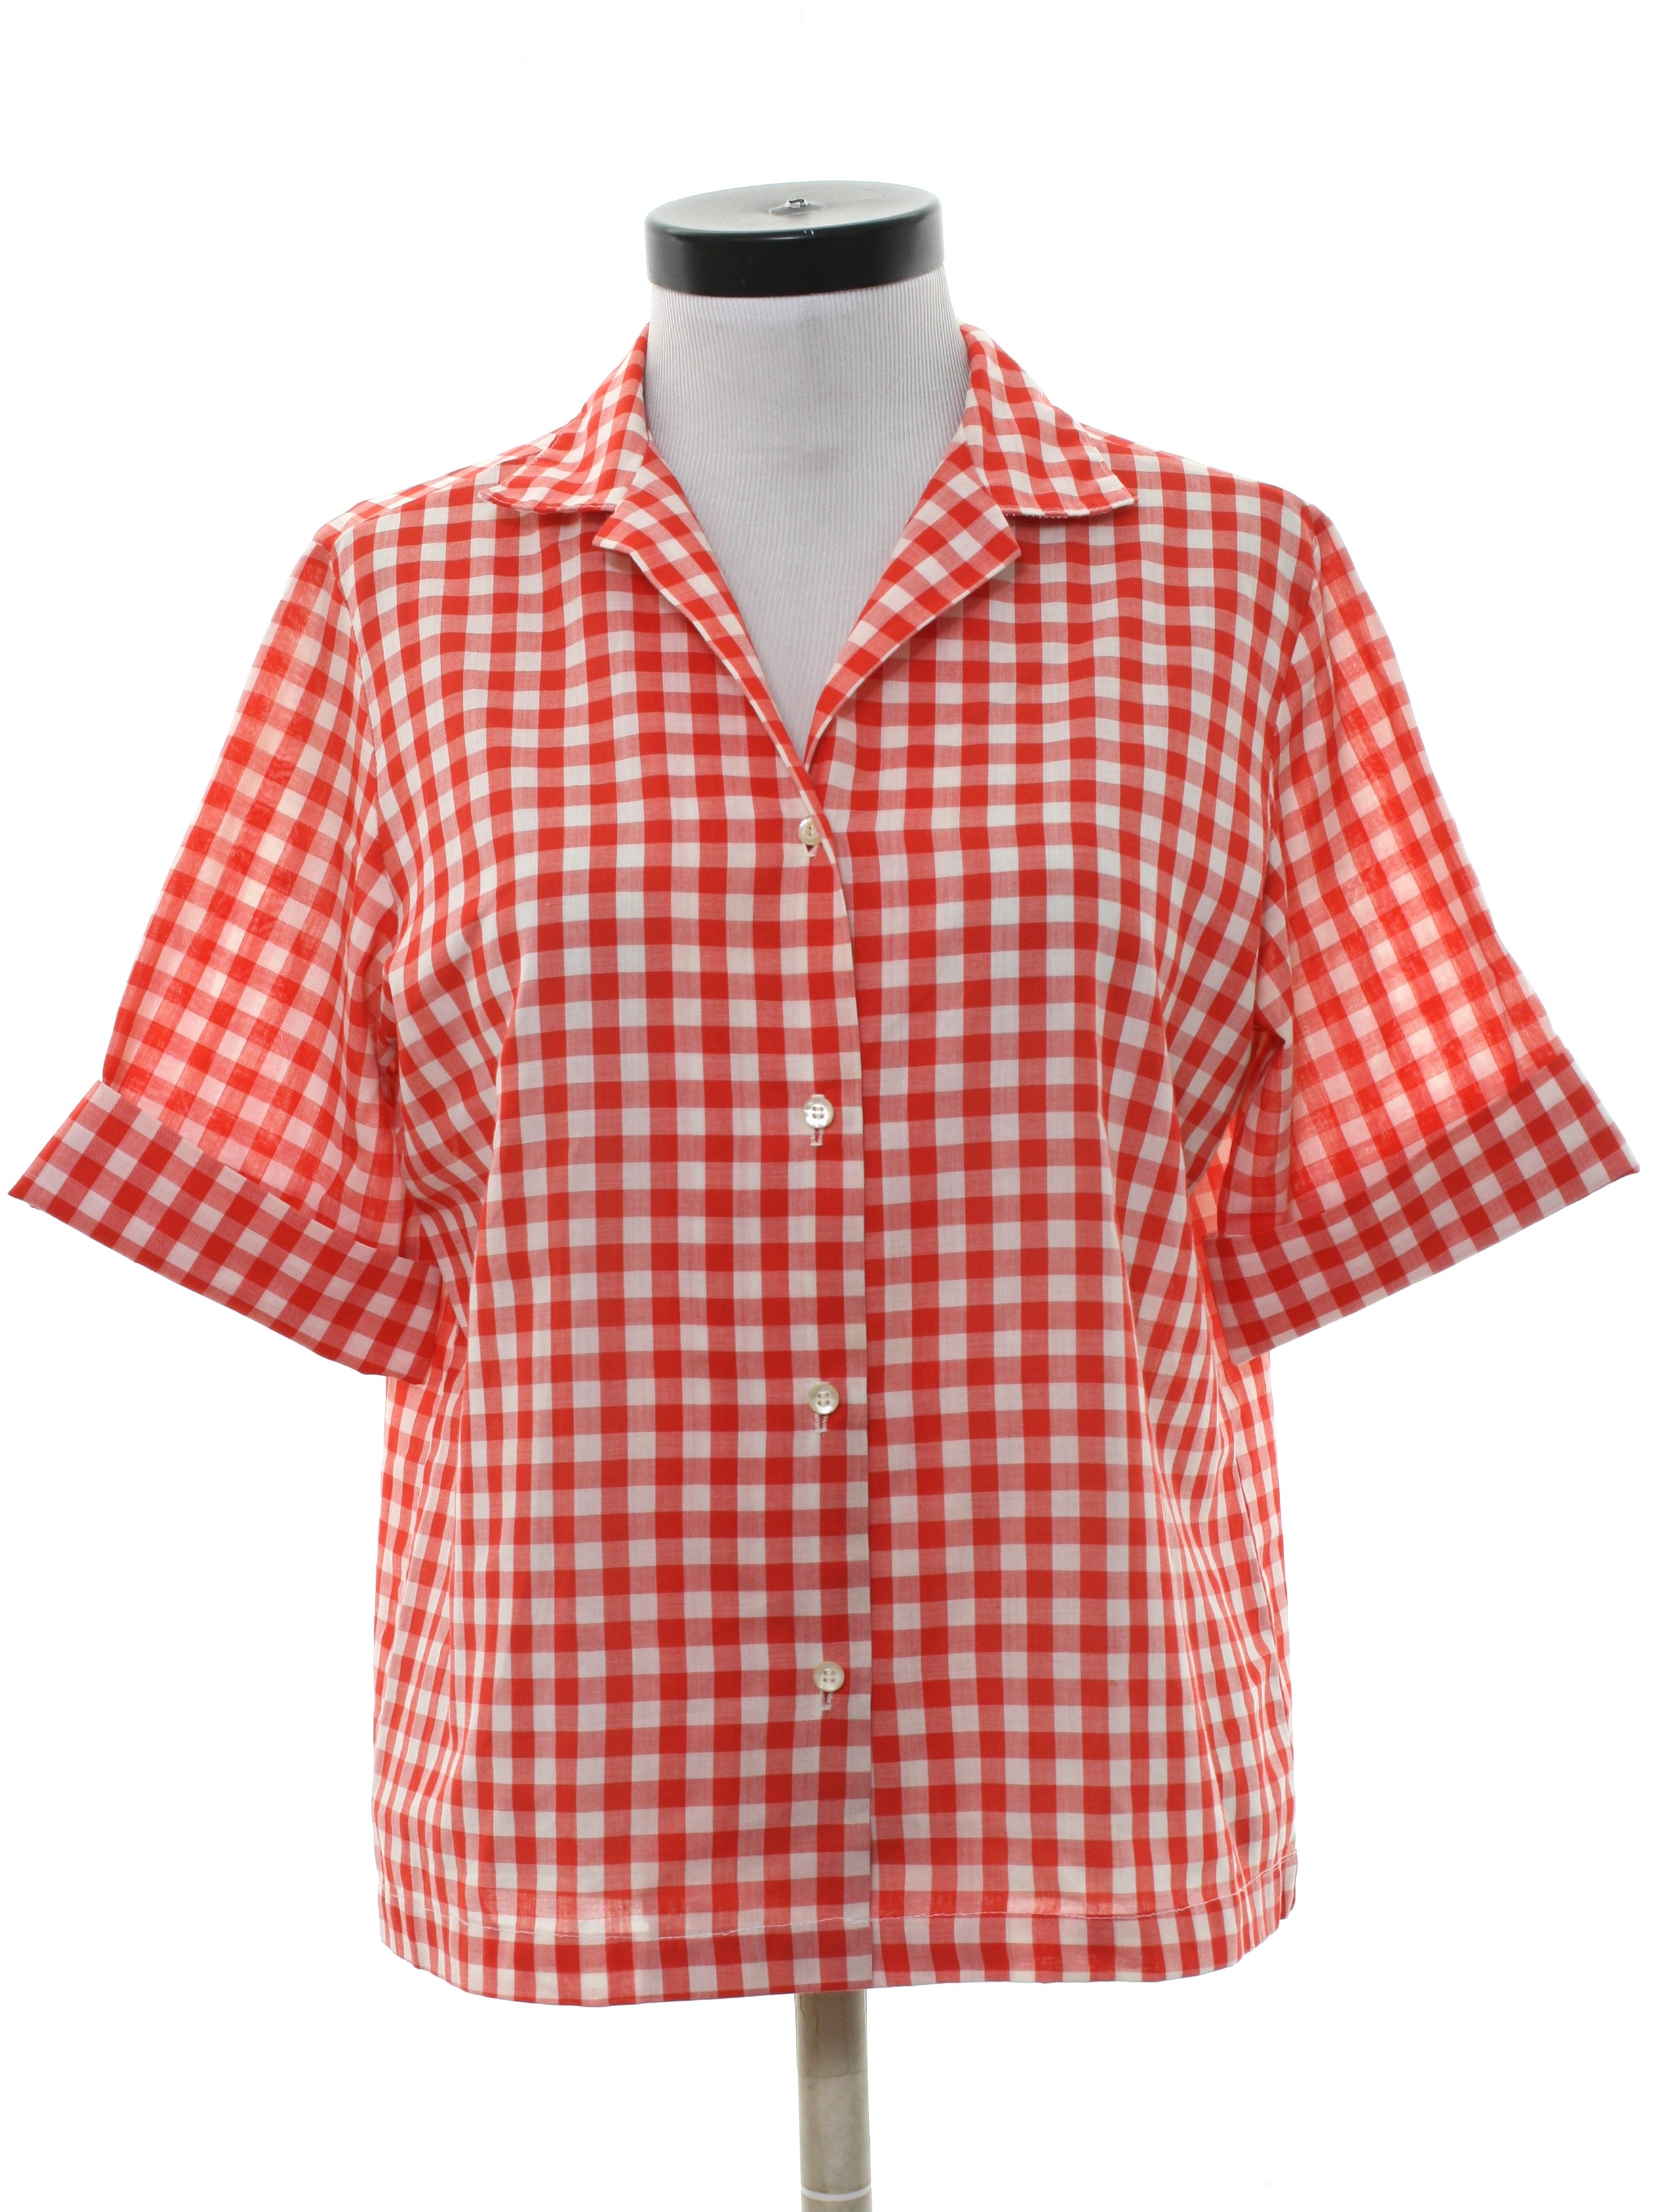 Sears 60's Vintage Shirt: 60s -Sears- Womens red and white background ...